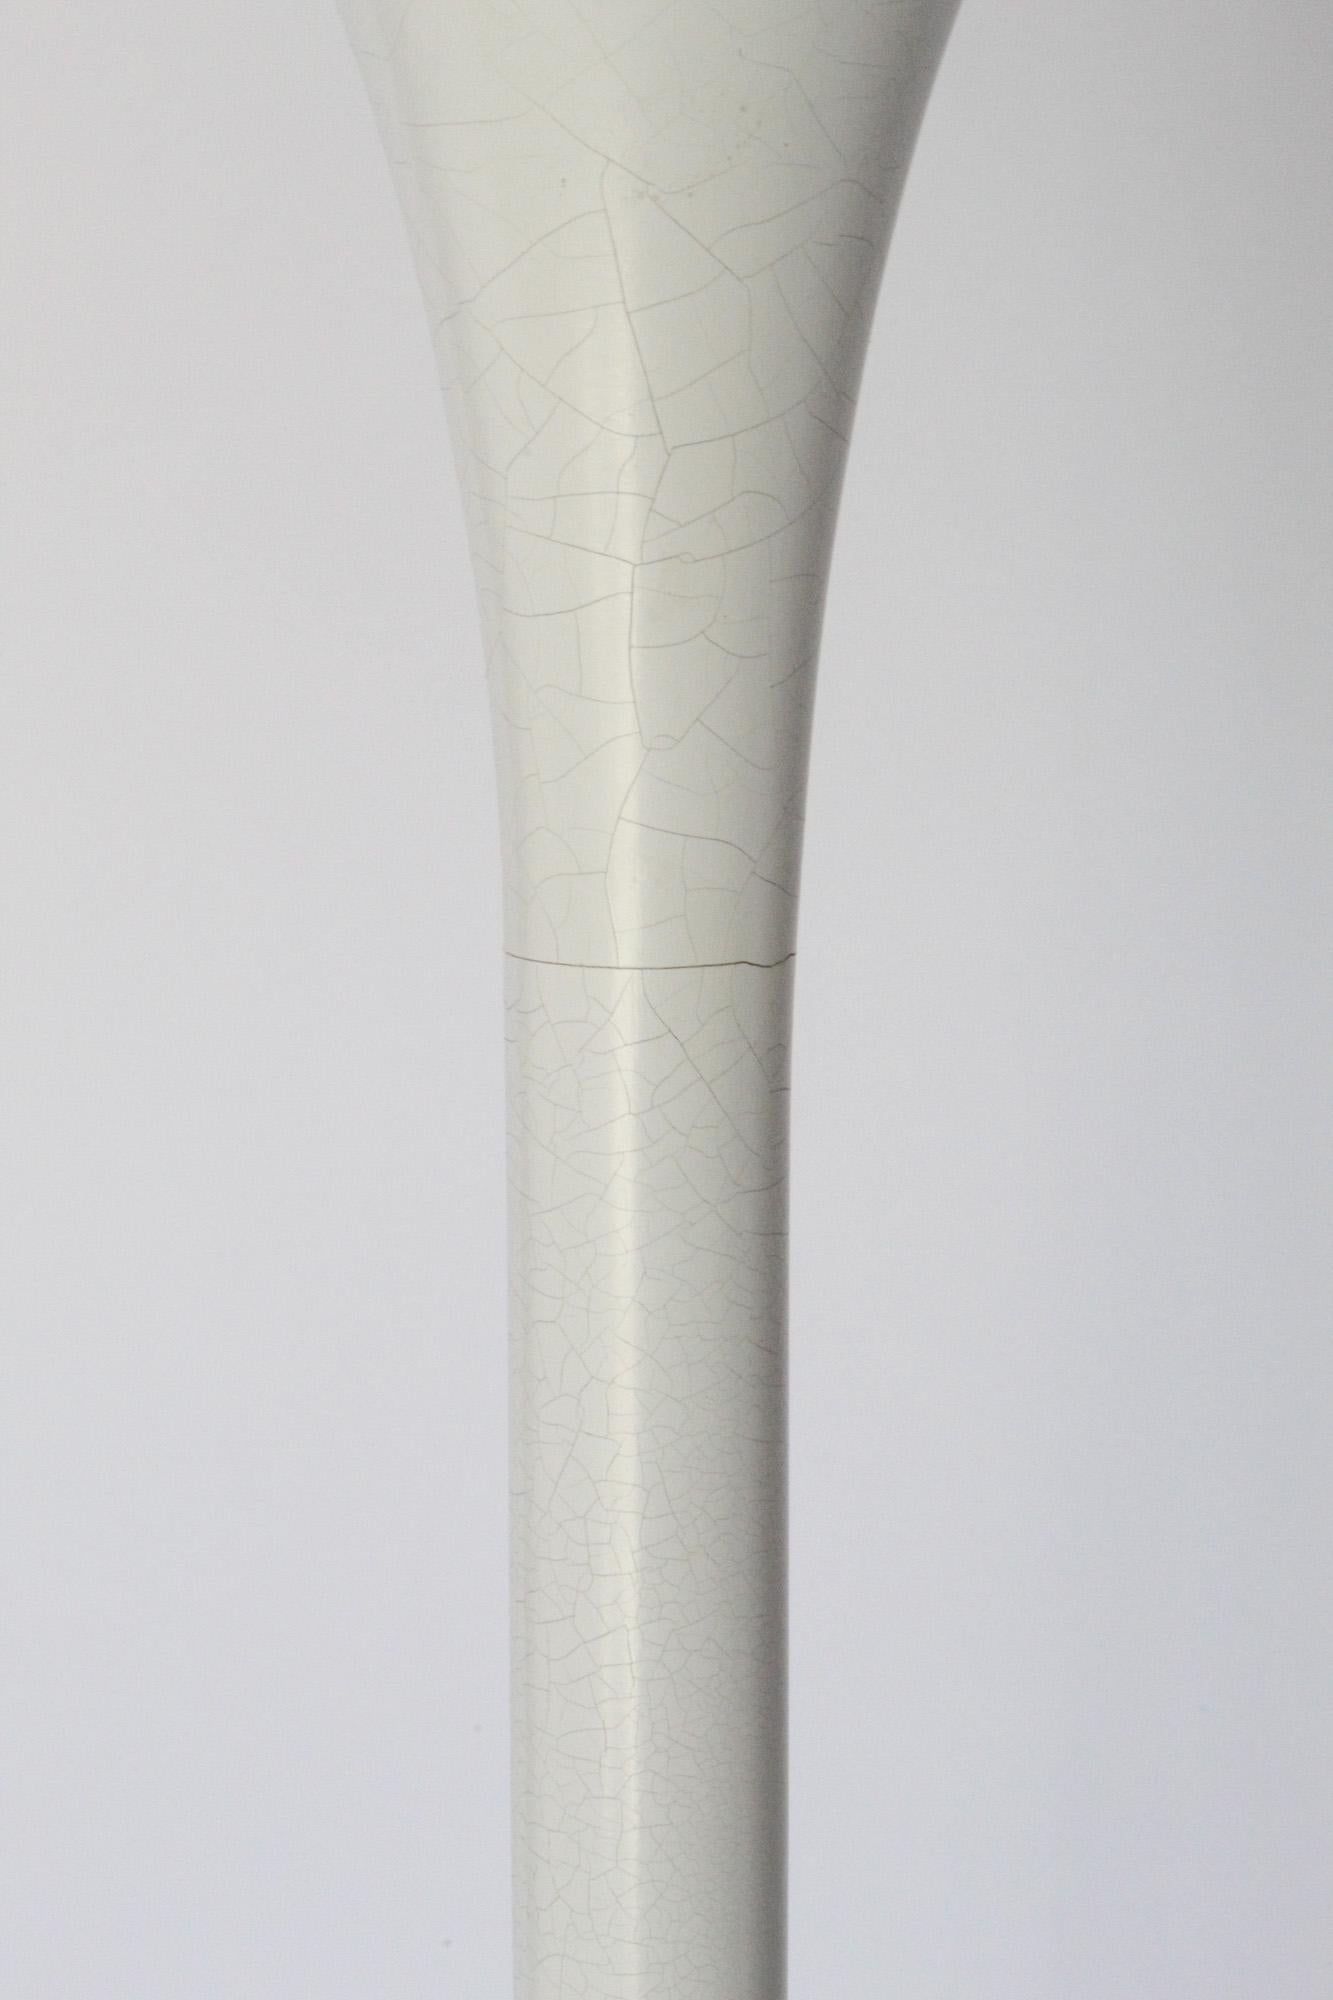 Enameled Max Bill Iconic Floor Lamp Torchère for BAG, Switzerland, 1960